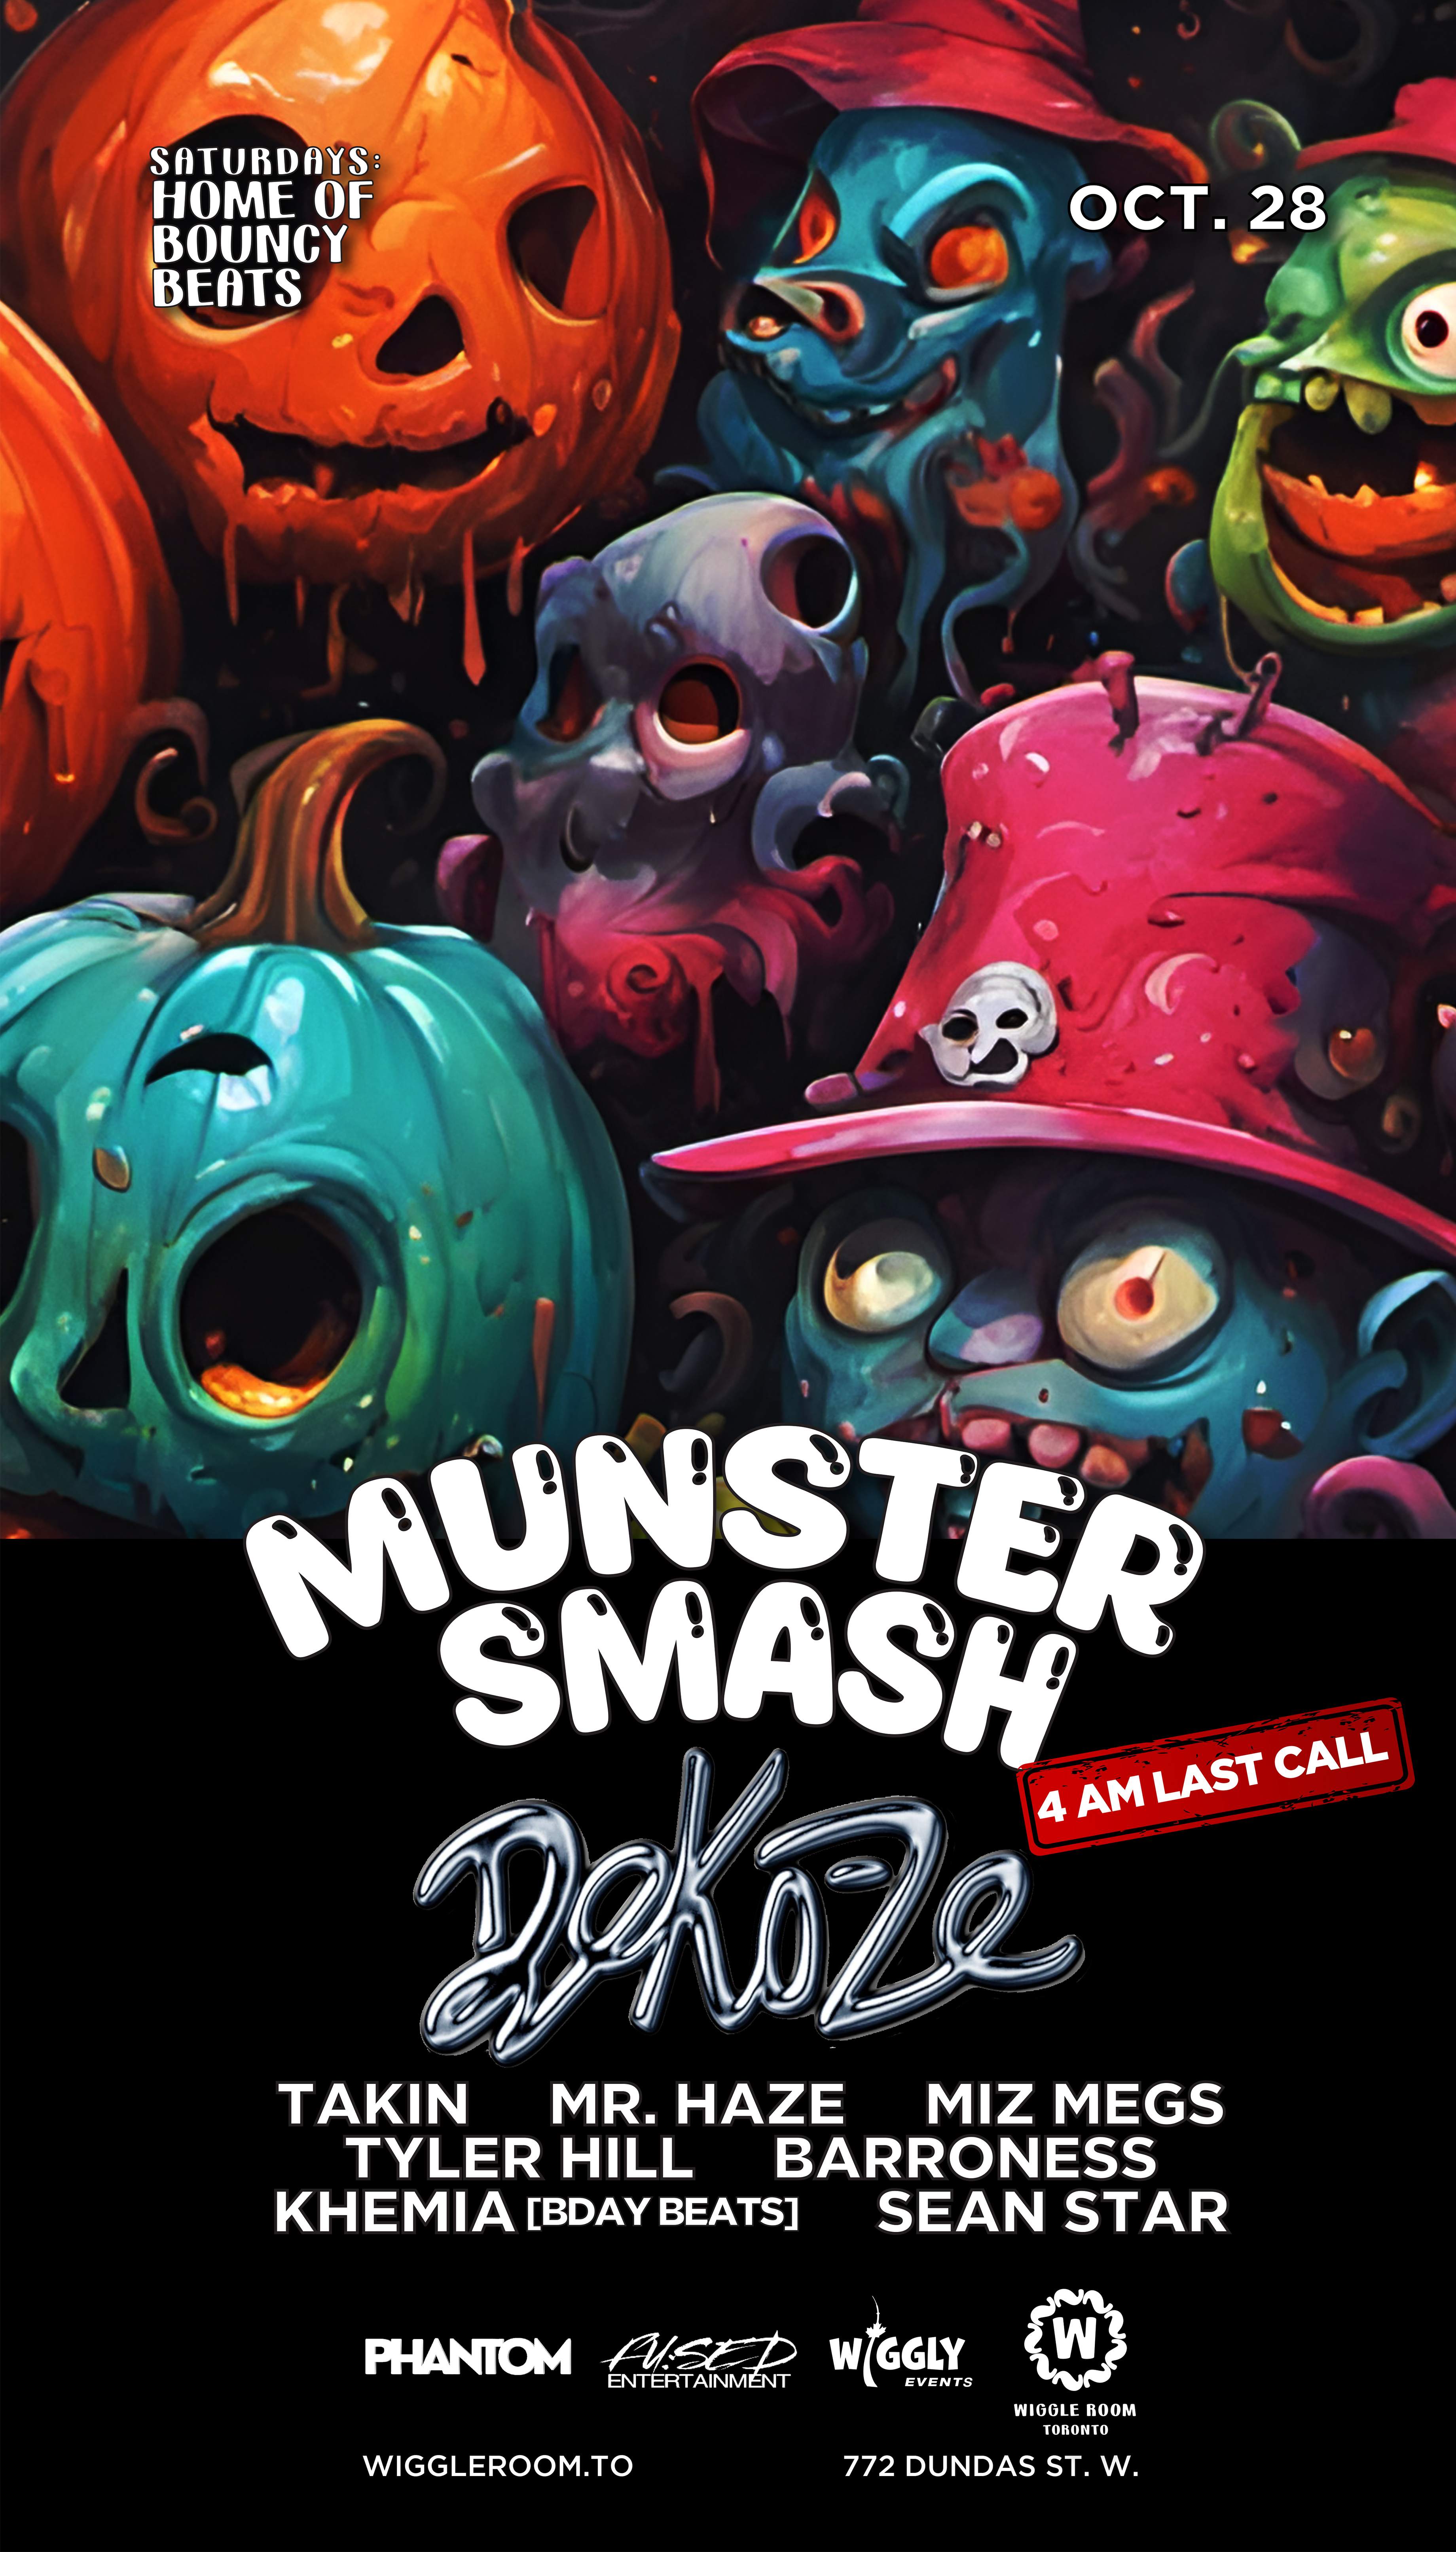 Halloween + Afterparty - Munster Smash | 4AM LAST CALL - フライヤー裏